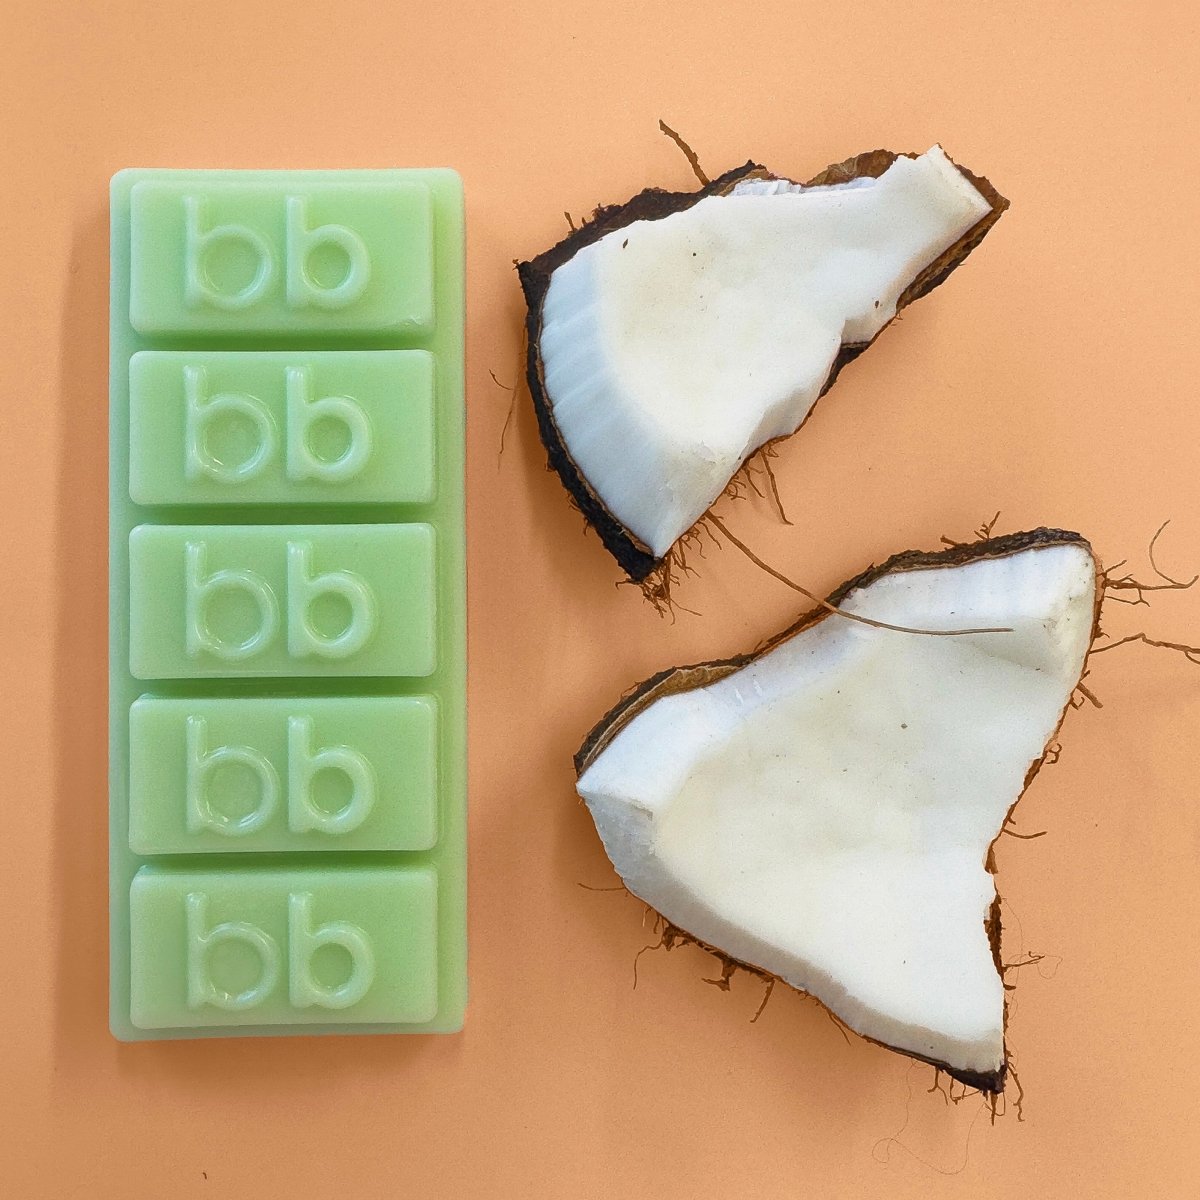 Coconut Cream Natural Soy Wax Melts - Candle Alternative Aromatherapy & Strong Scent Fragrance Made in Australia by Bath Box